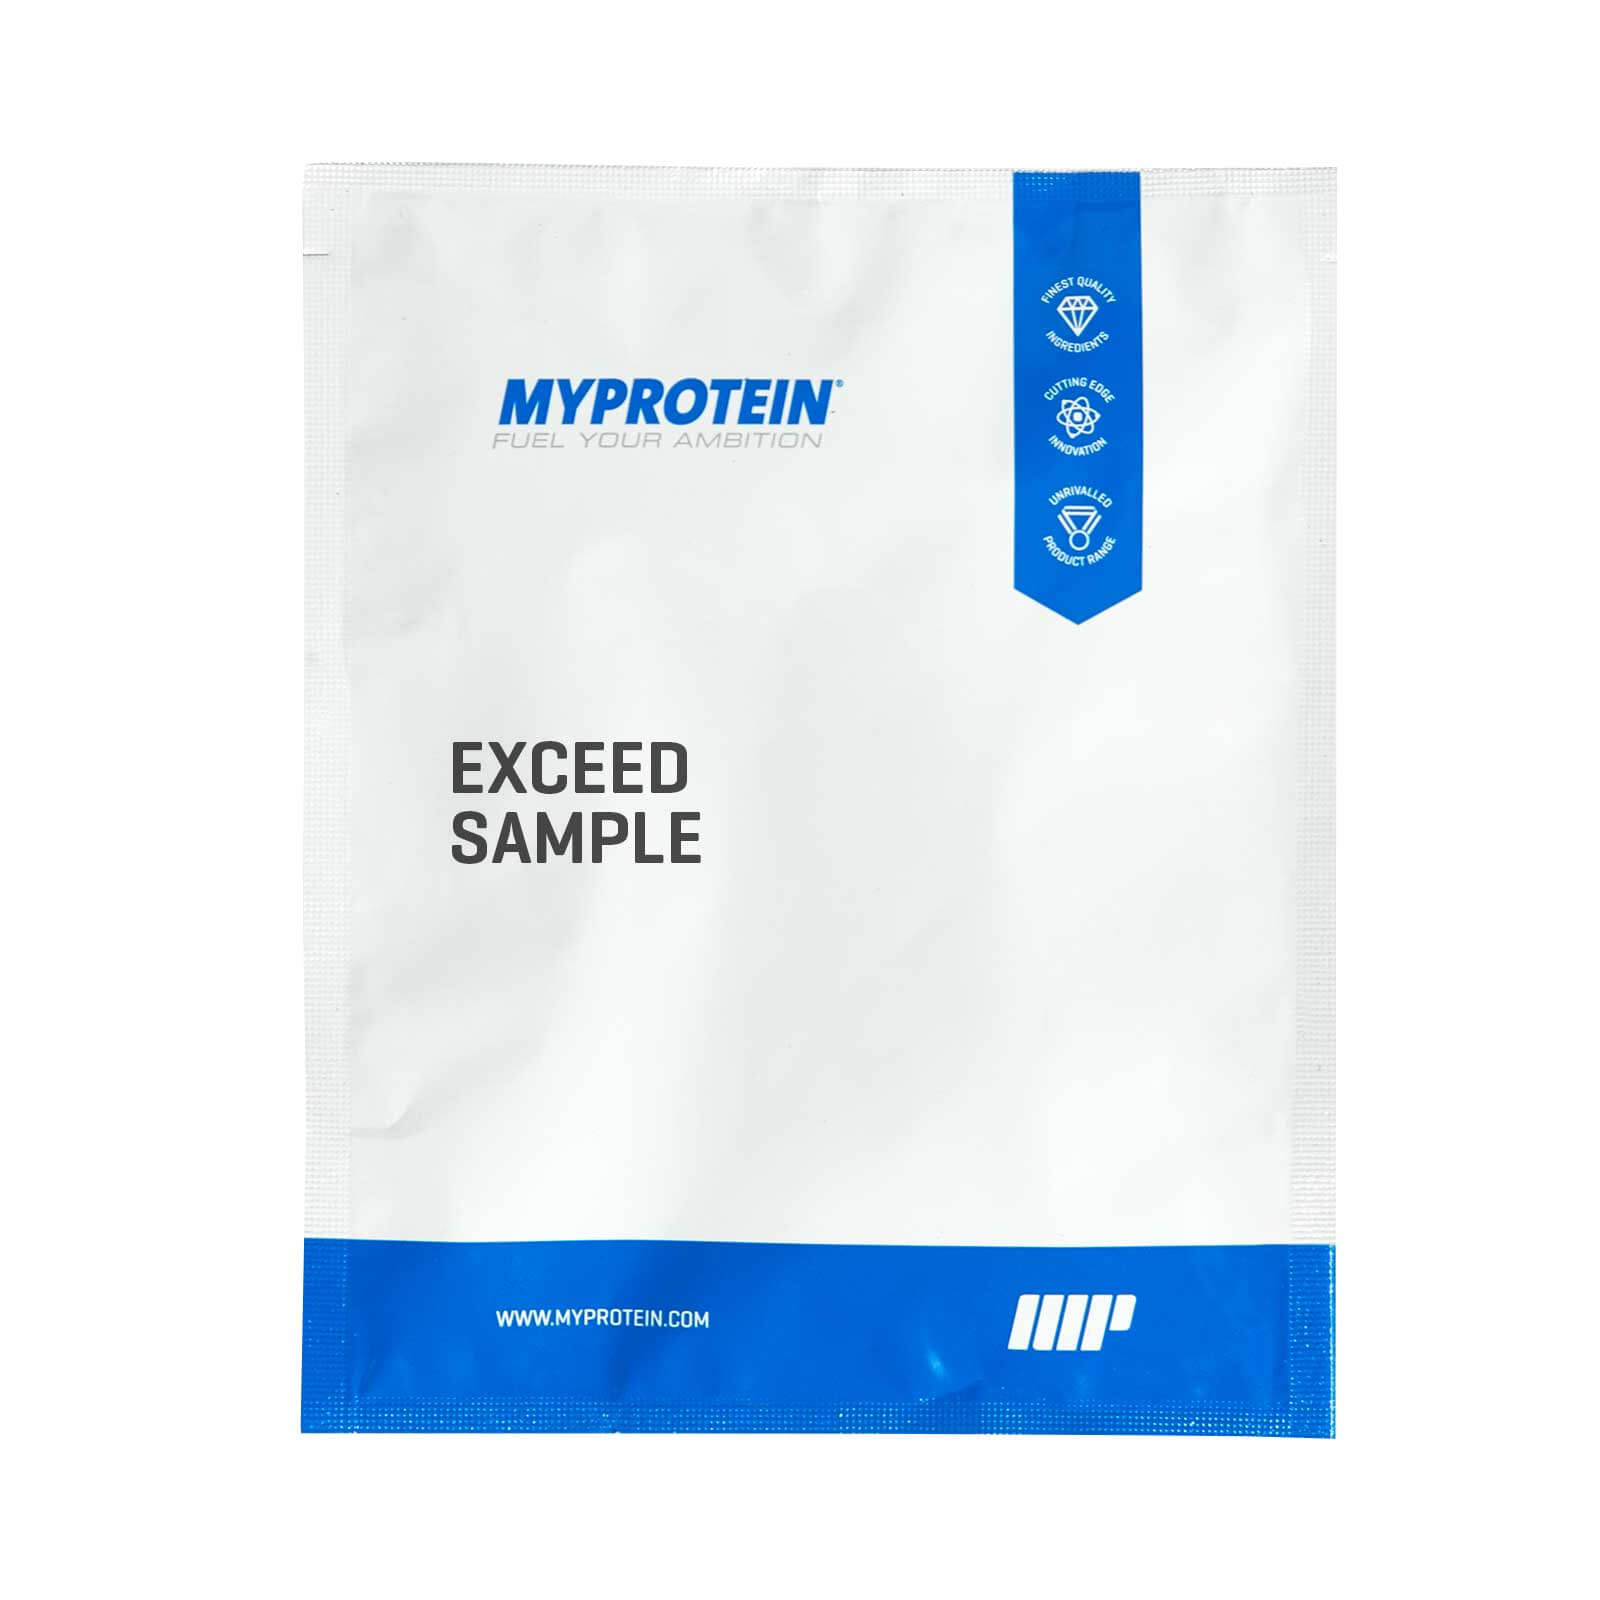 Myprotein Exceed (Sample)